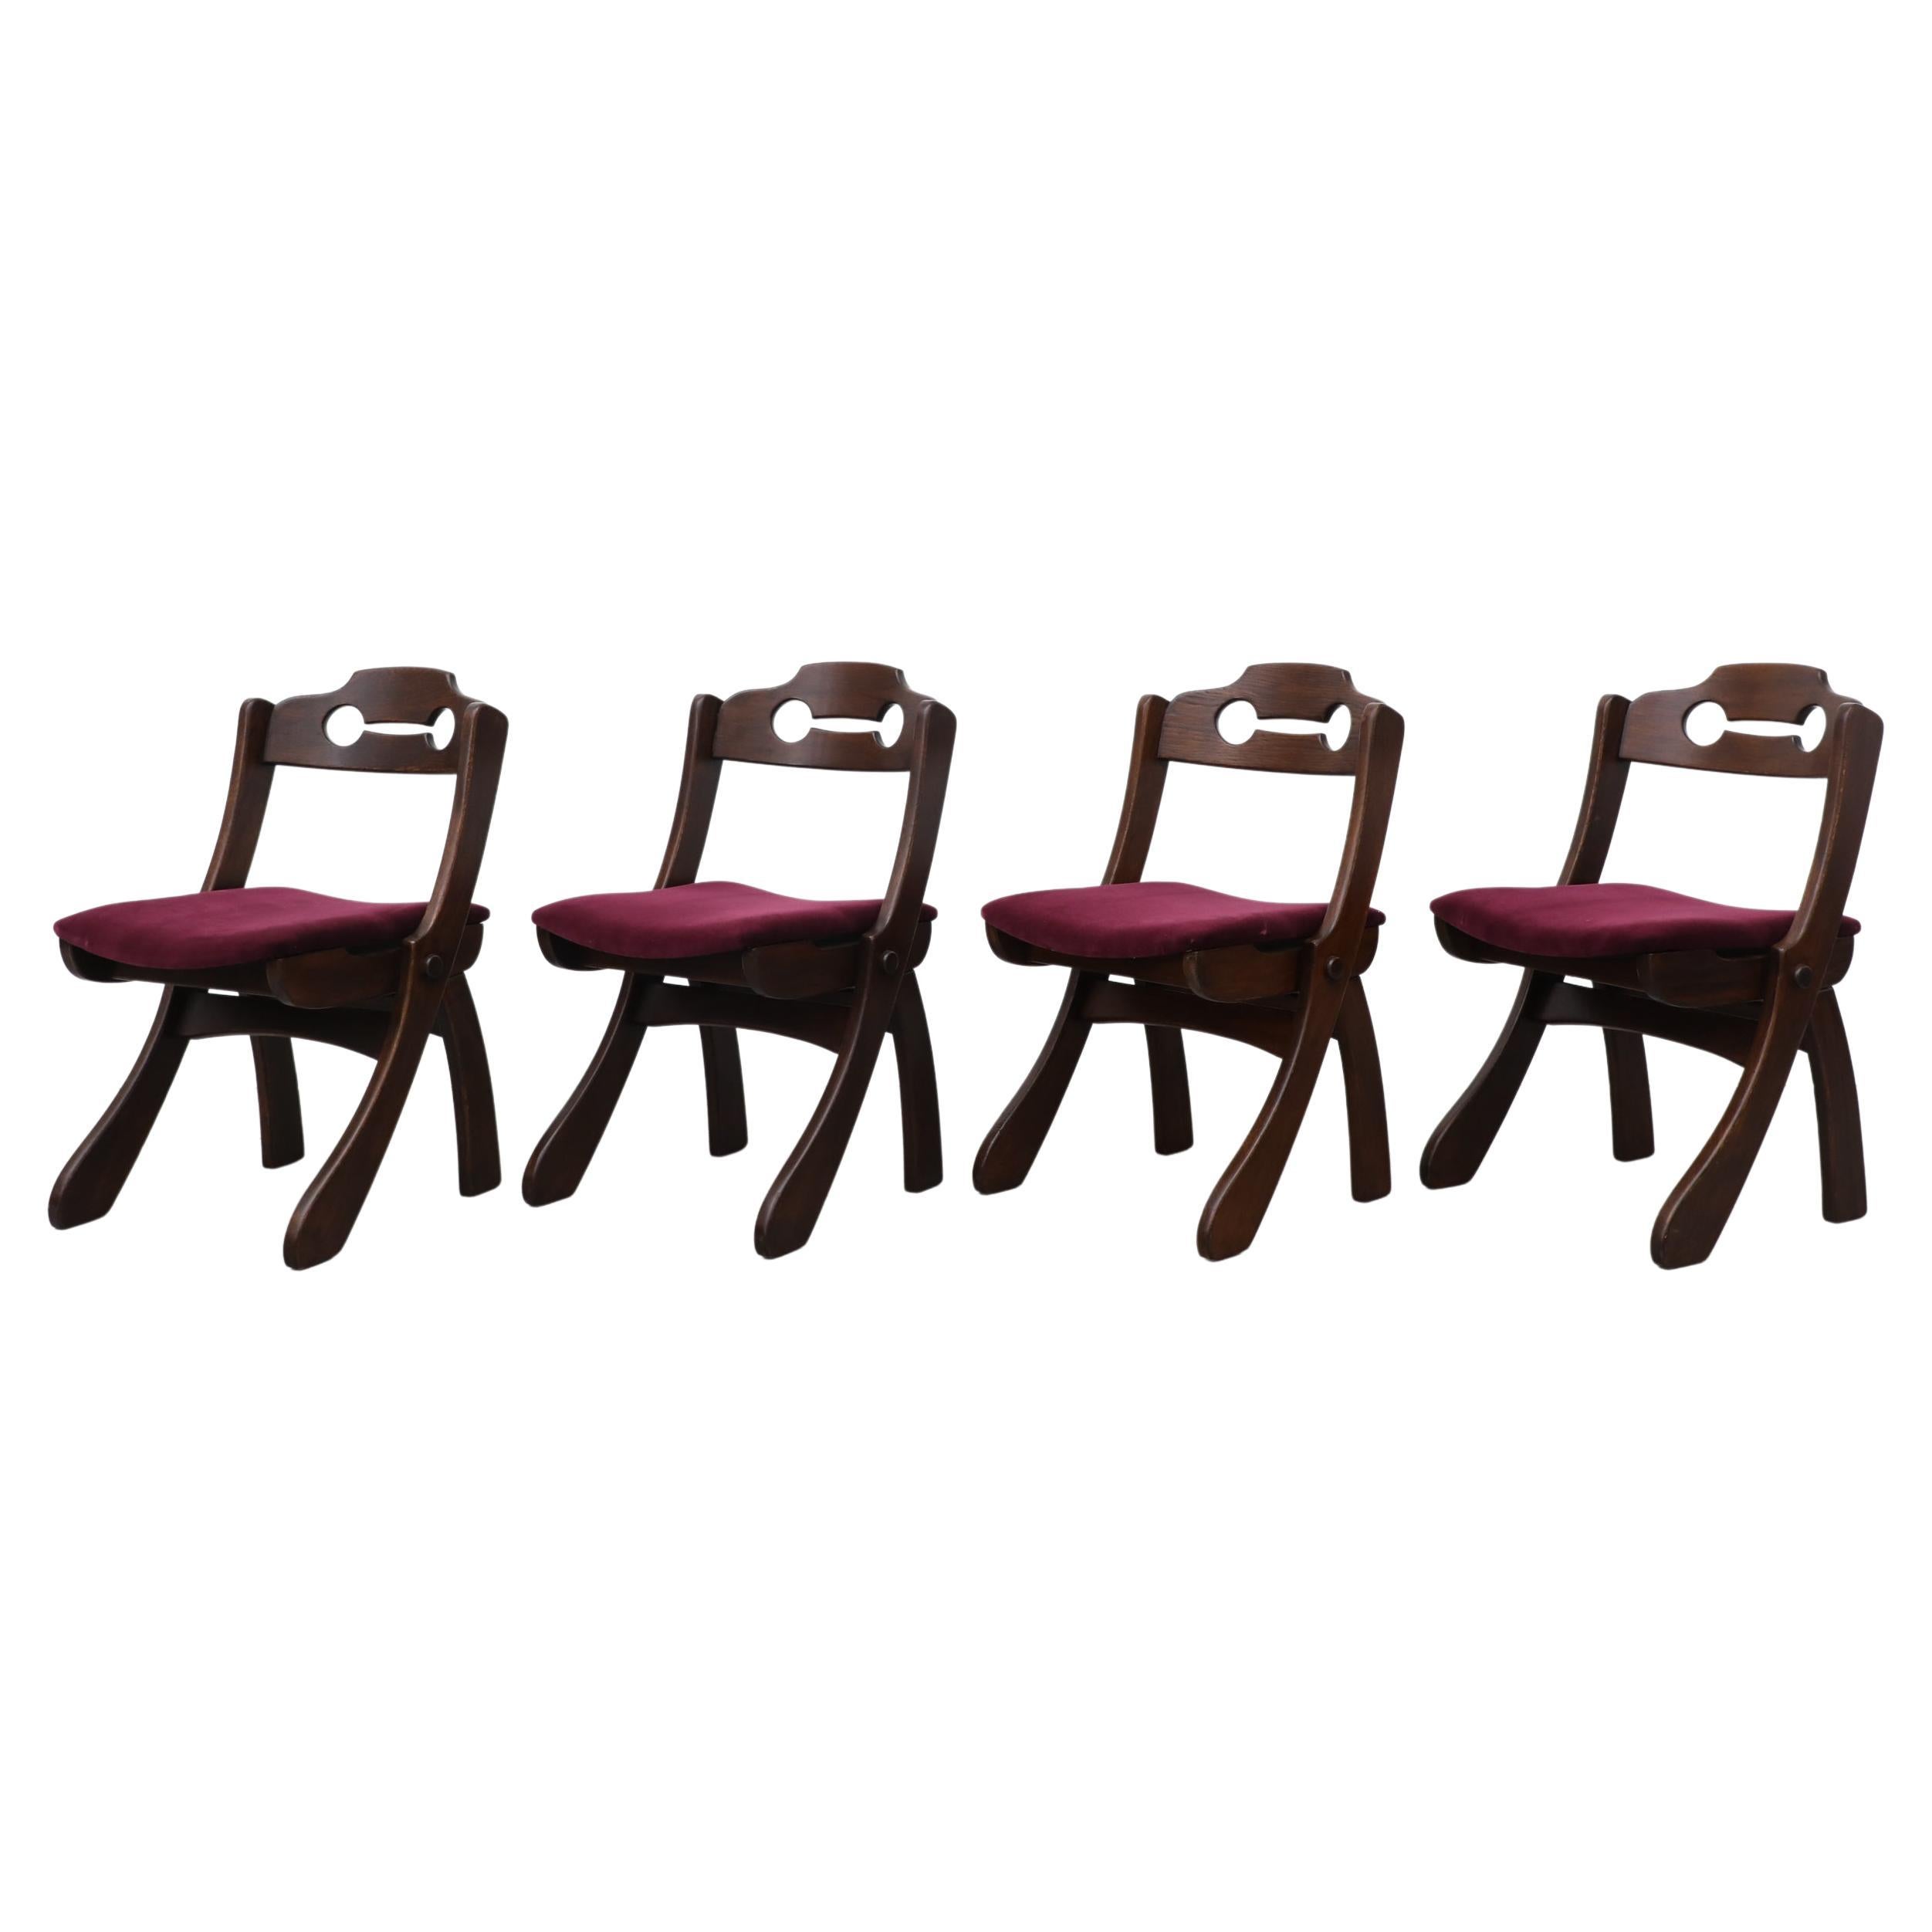 Set of 4 Dark Stained Brutalist Razor Back Chairs with New Burgundy Velvet Seats For Sale